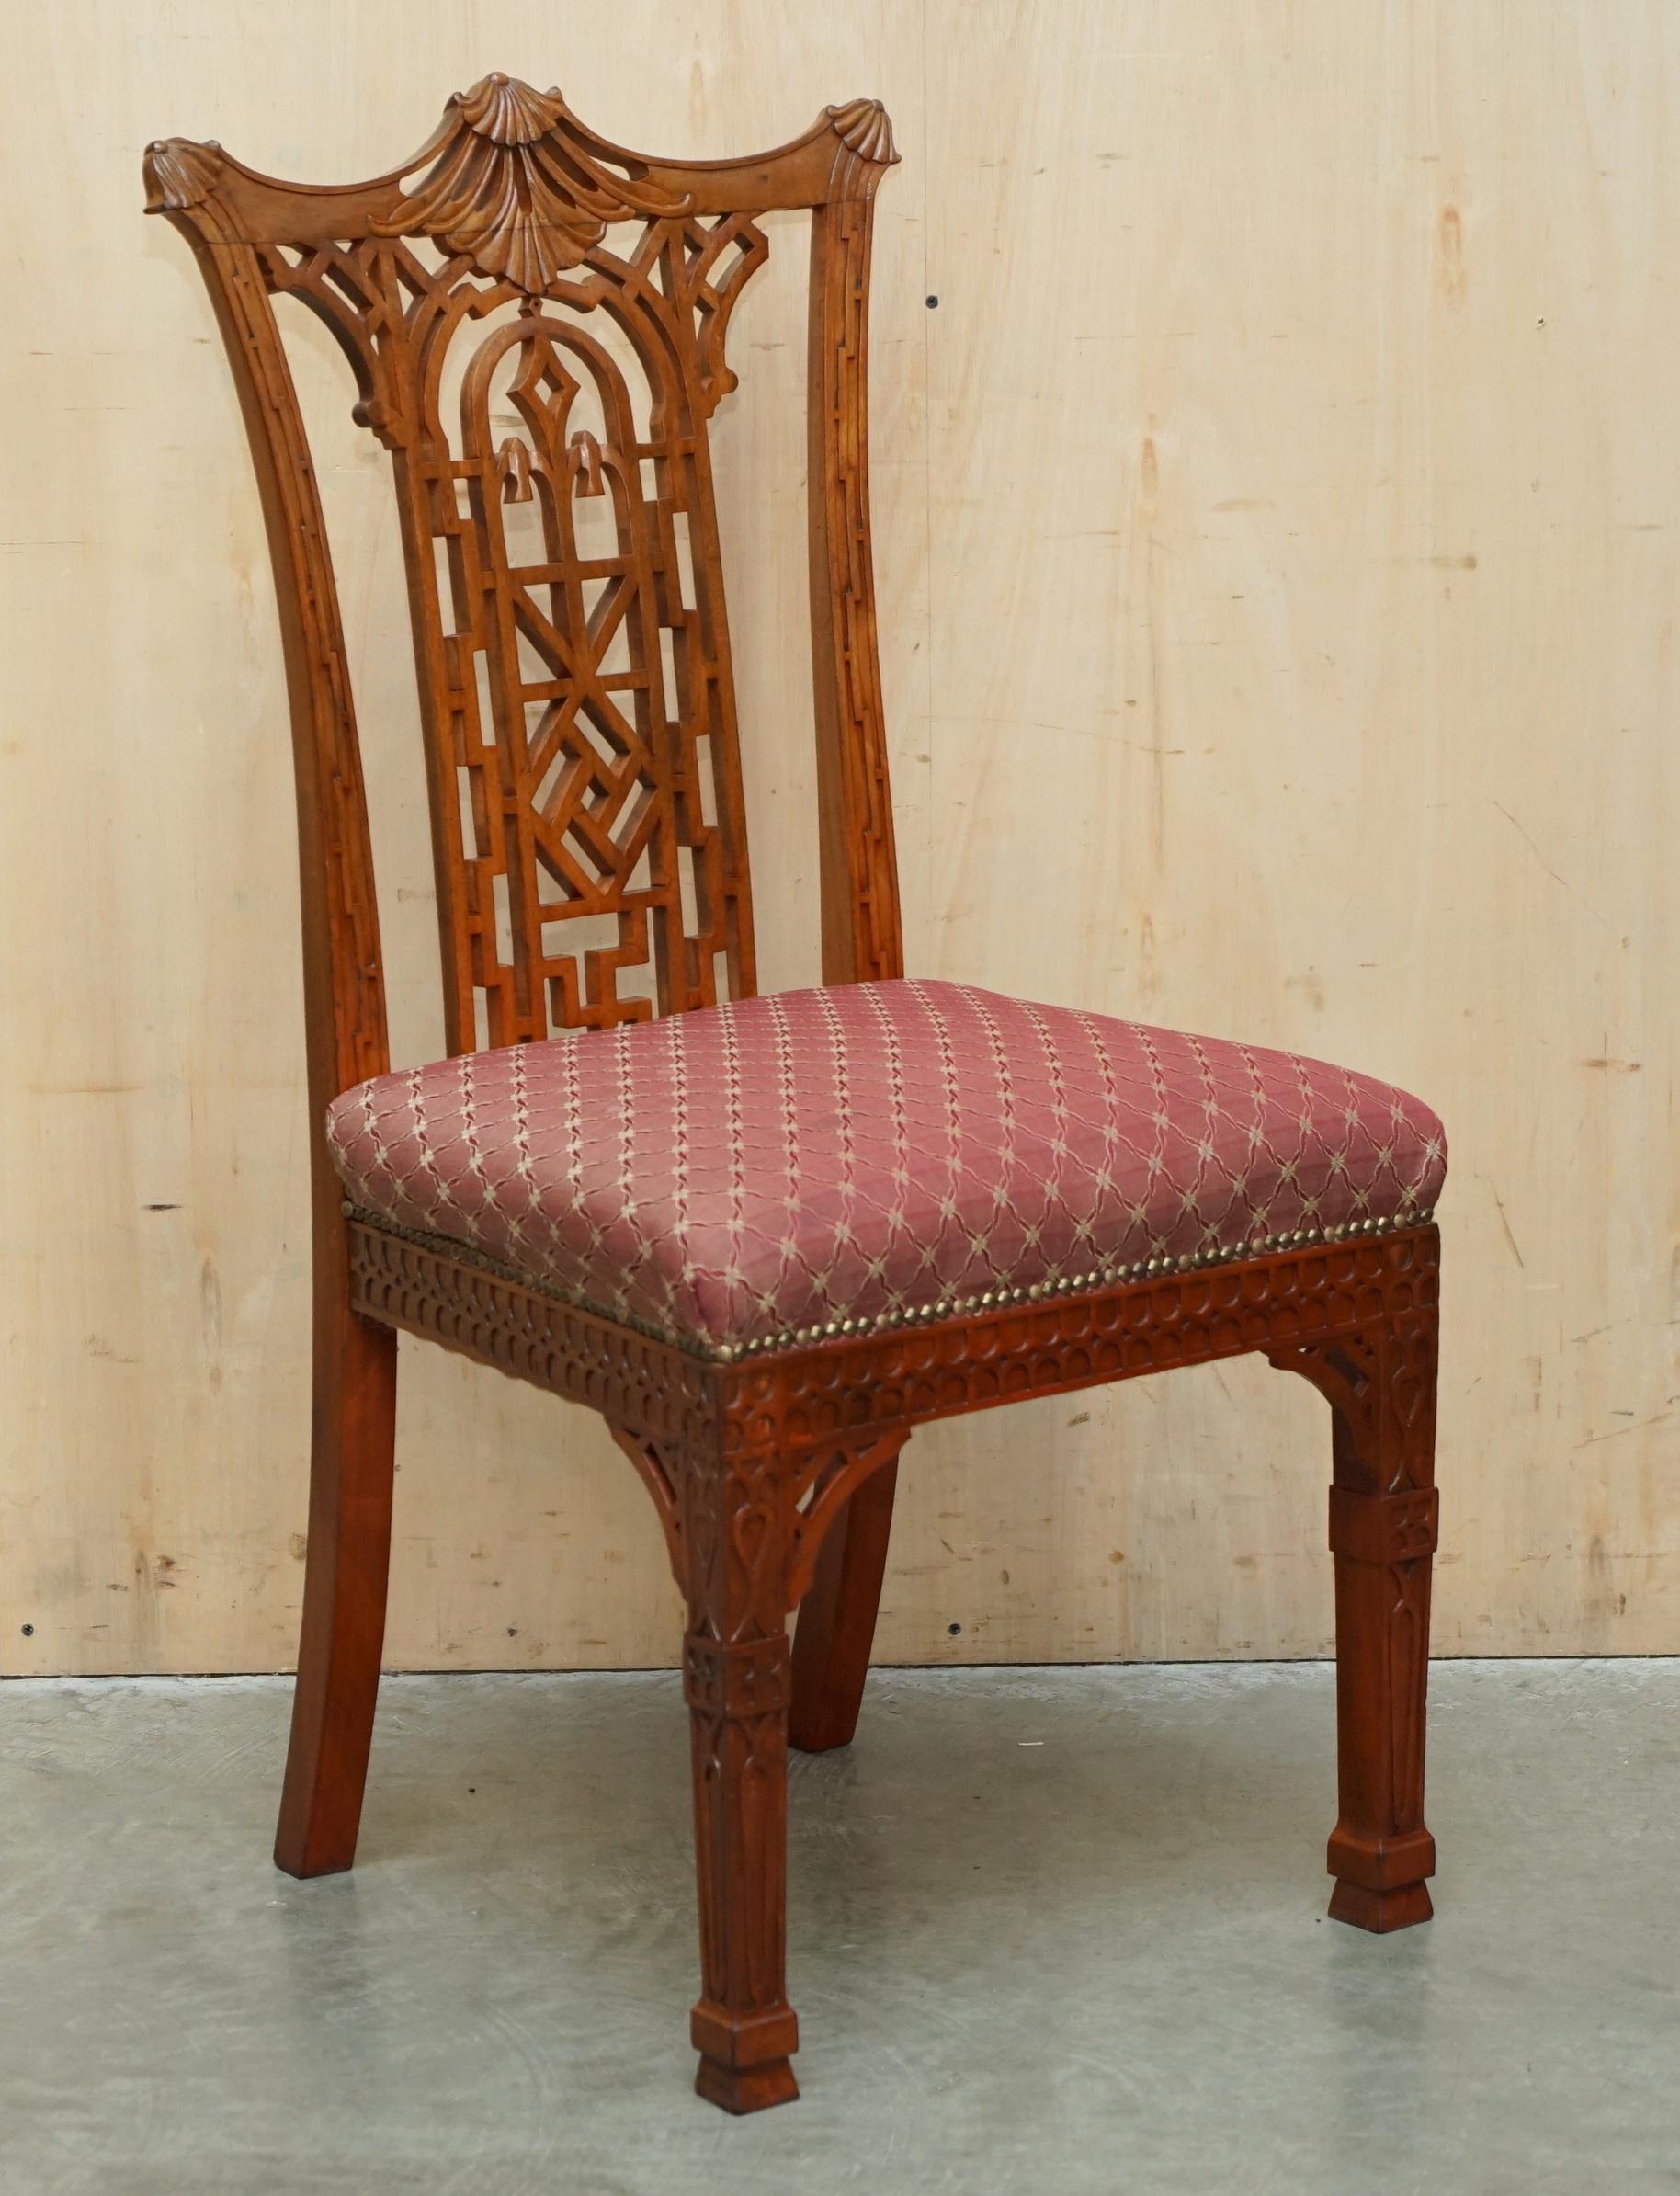 Royal House Antiques

We are delighted to offer this stunning suite of museum quality, George III style Thomas Chippendale Chinese Pagoda top dining chairs

Please note the delivery fee listed is just a guide and covers London only for the UK and